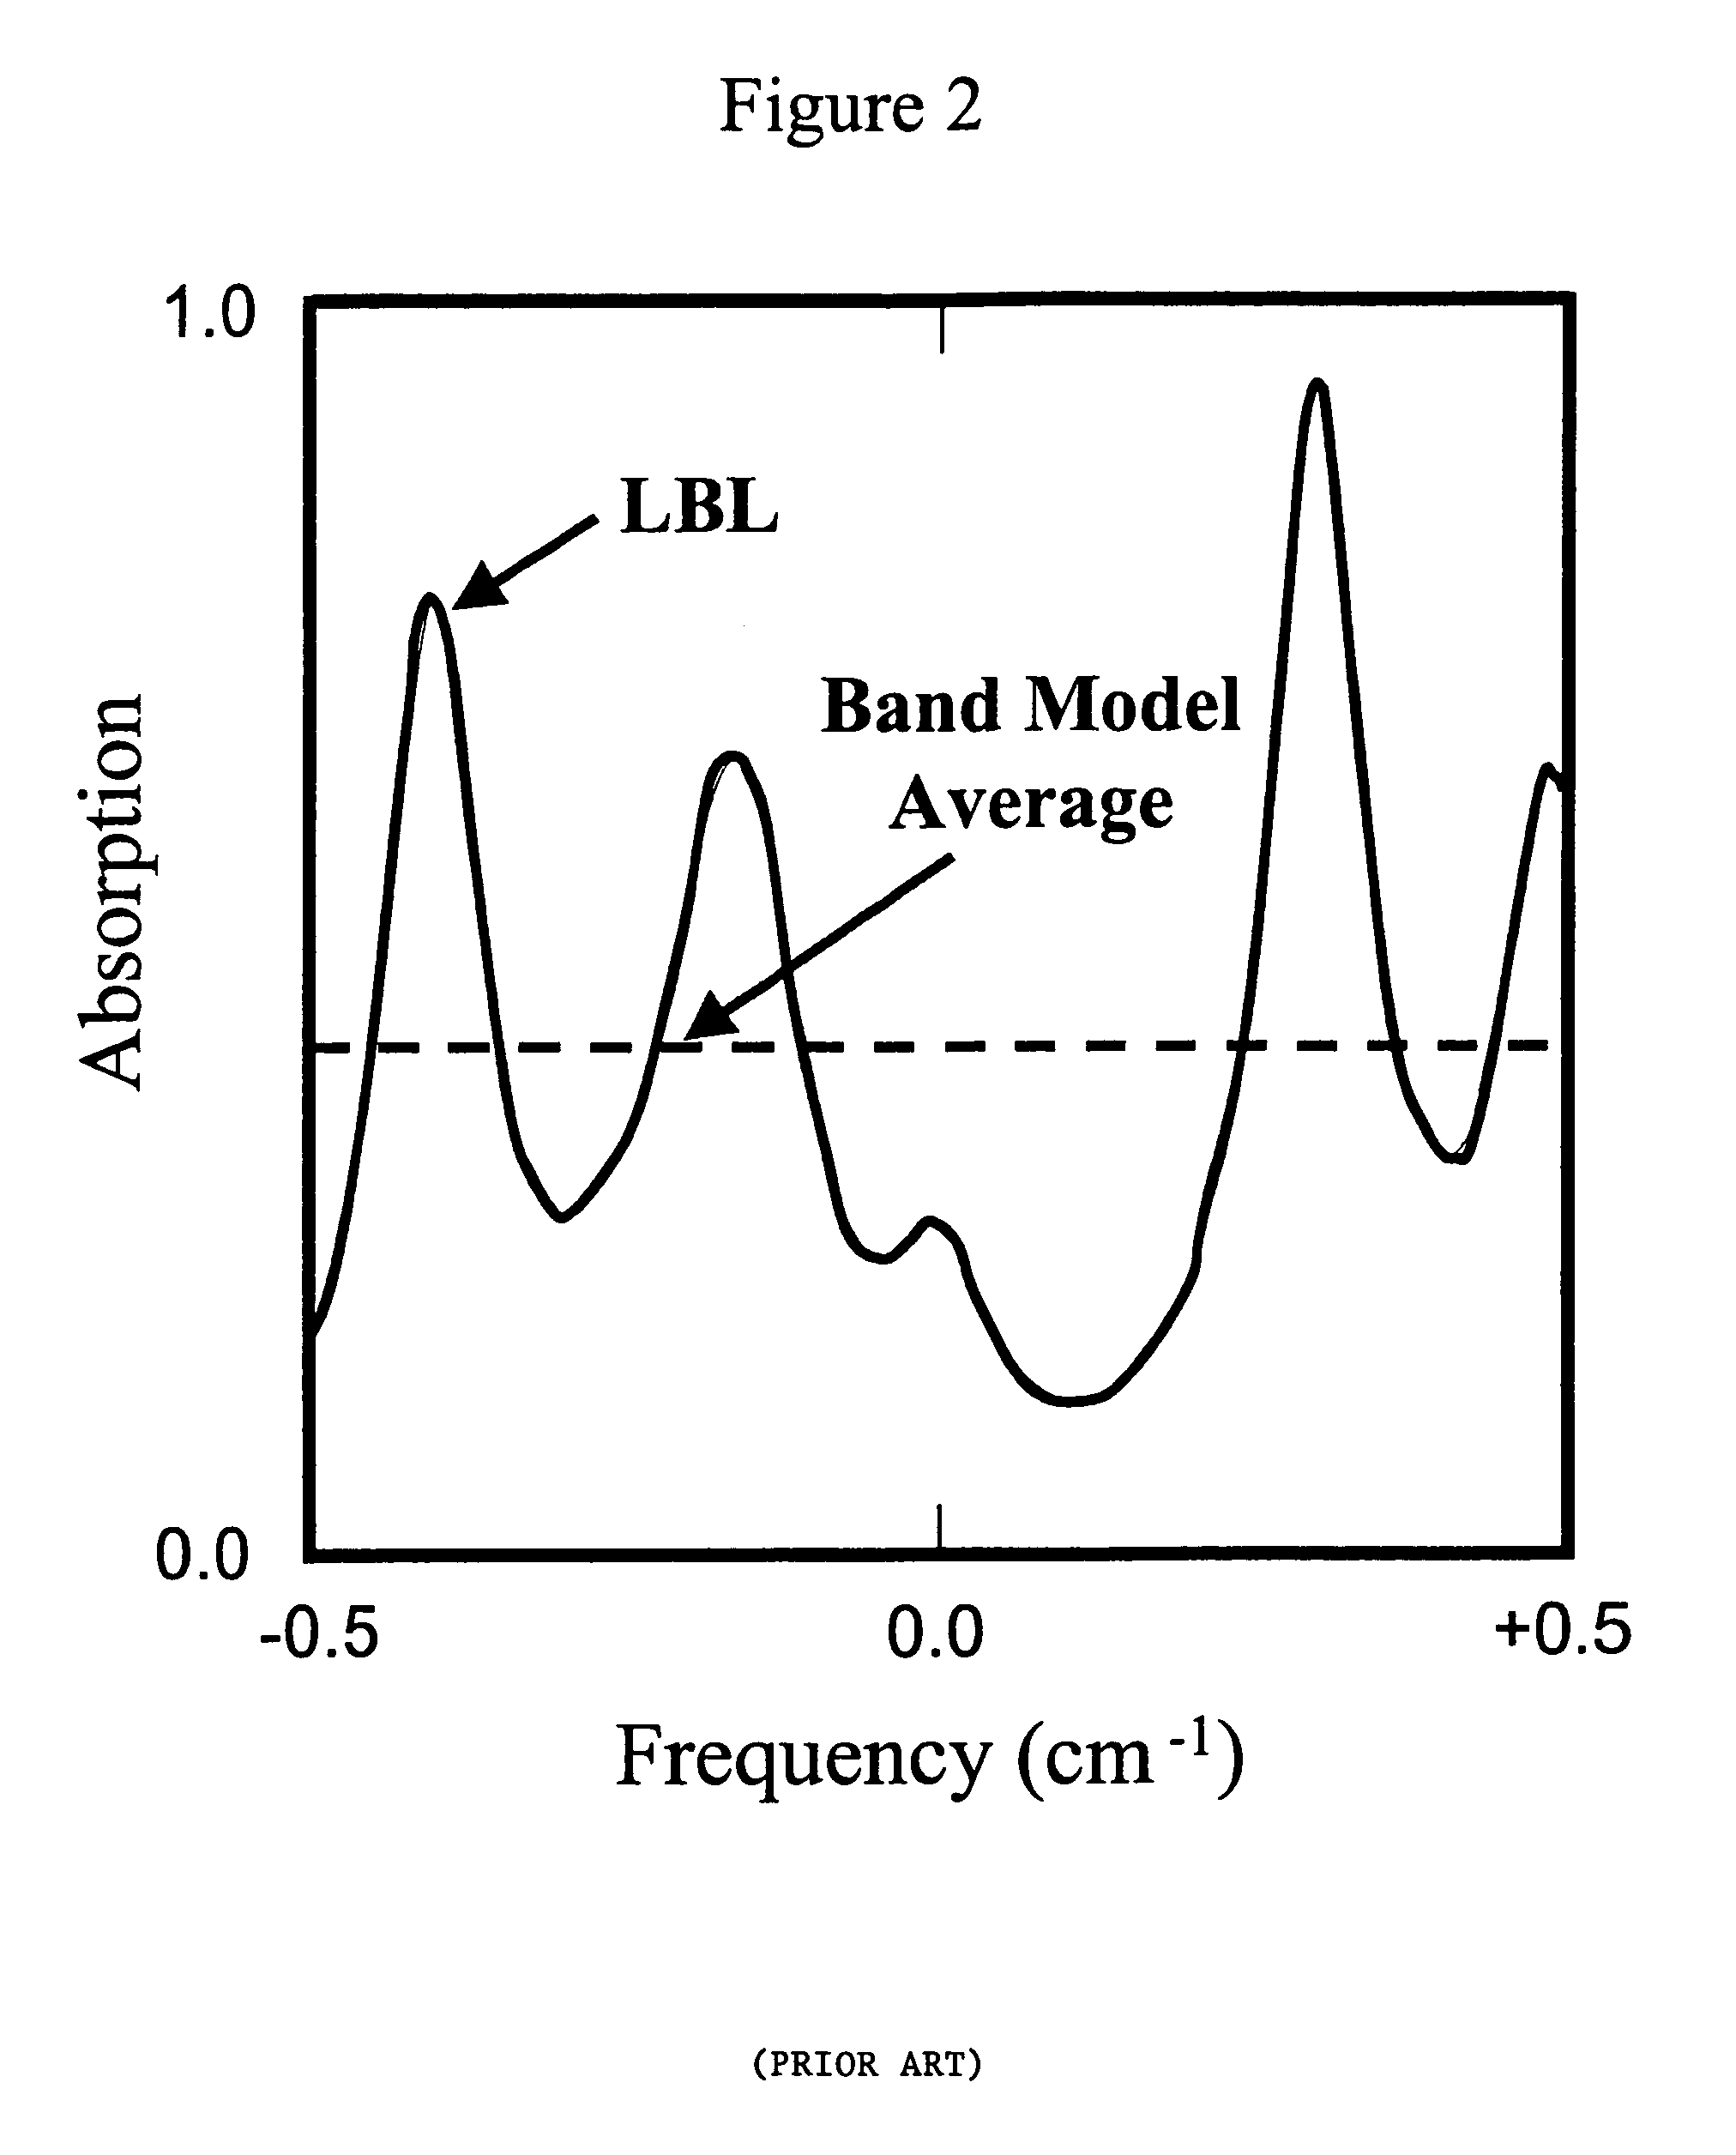 Band model method for modeling atmospheric propagation at arbitrarily fine spectral resolution